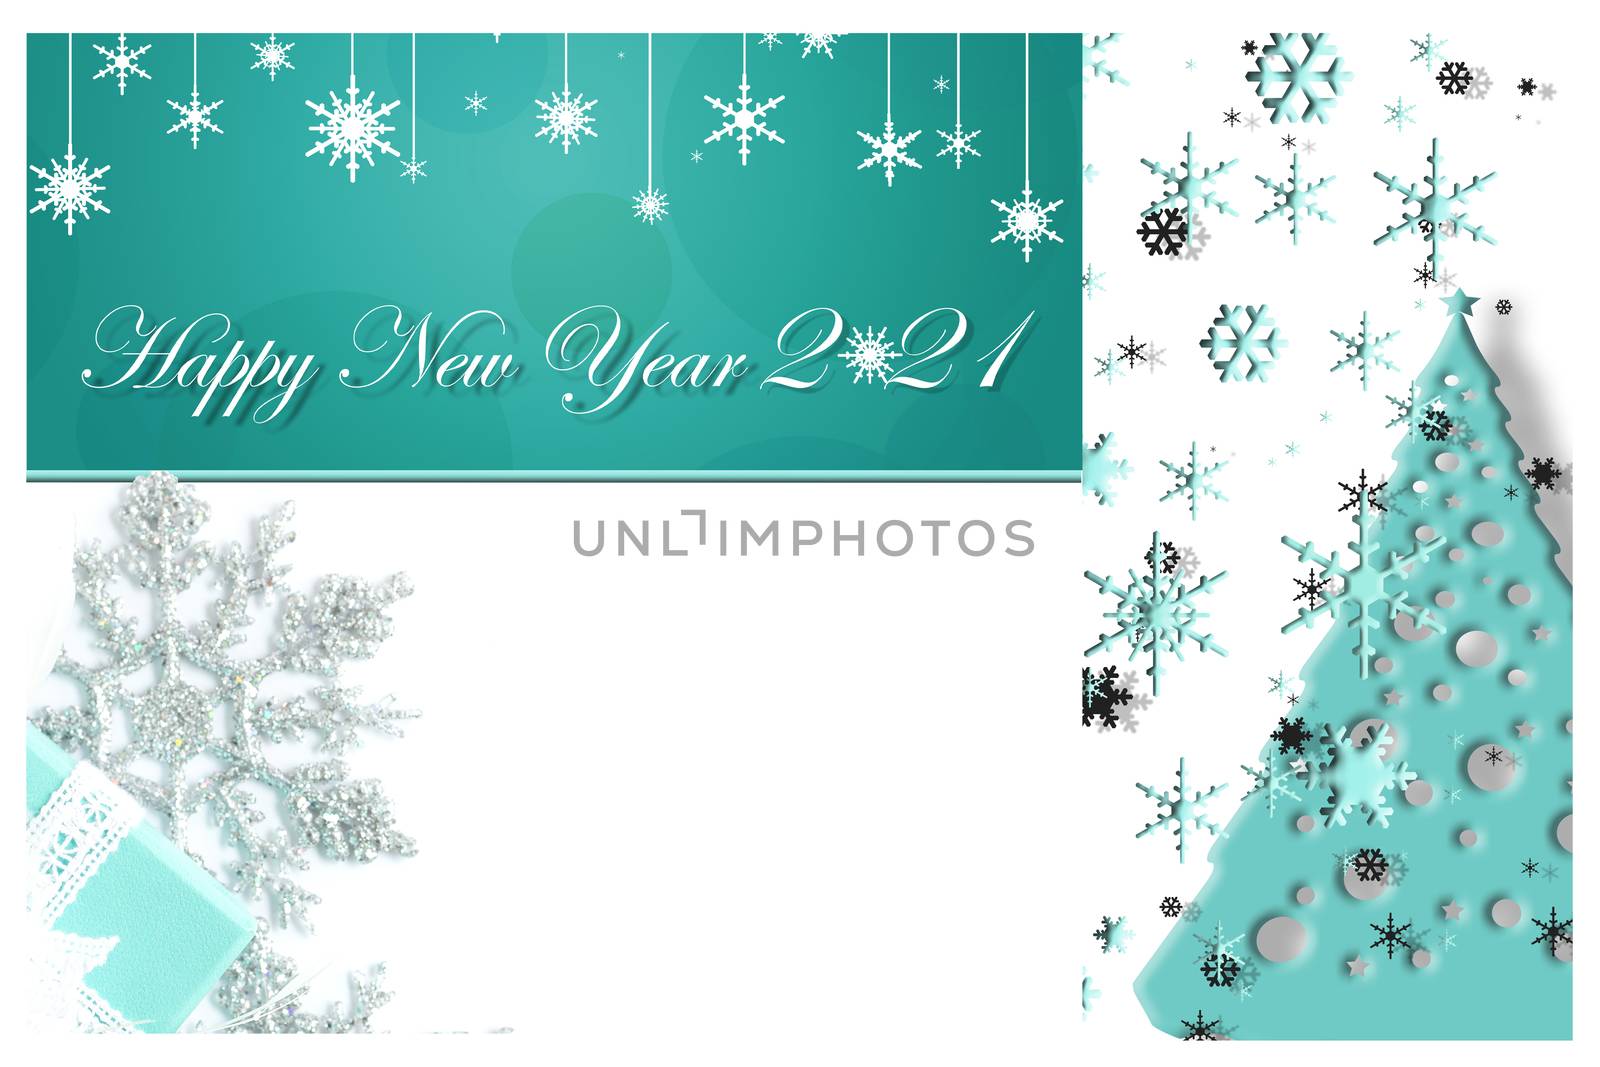 Christmas and New Year collage in turquoise blue colour. Snowflakes, Christmas tree, gift box on white background with text Happy New Year 2021. Christmas concept. Illustration, copy space, banner